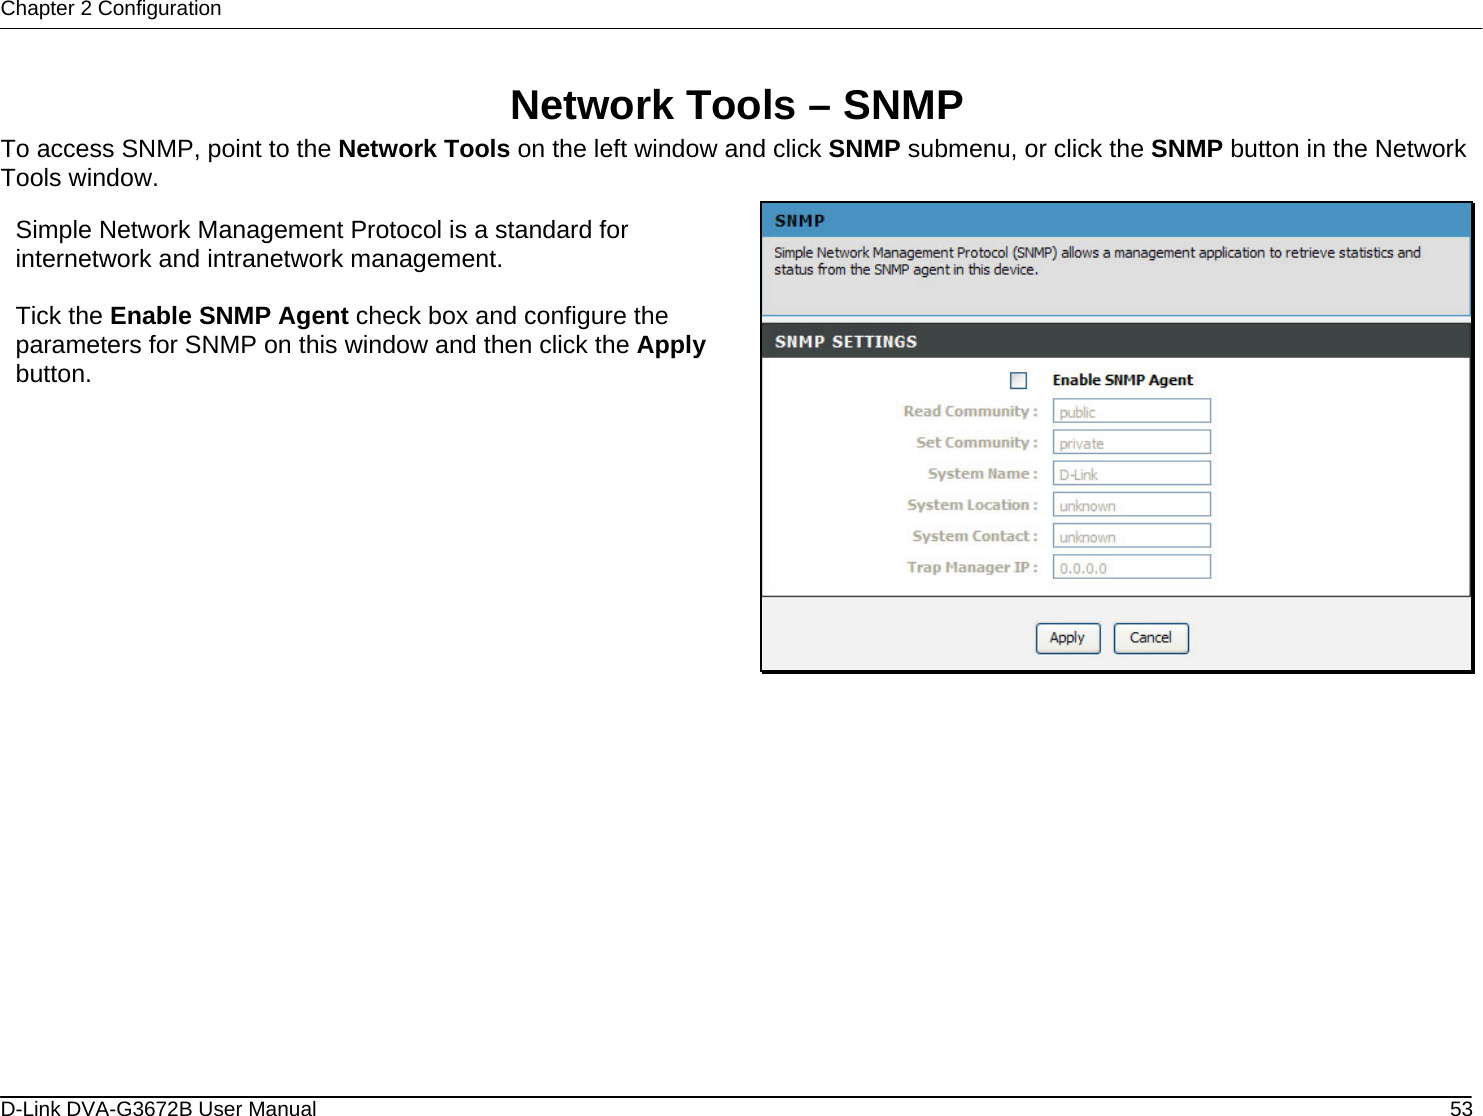 Chapter 2 Configuration  Network Tools – SNMP To access SNMP, point to the Network Tools on the left window and click SNMP submenu, or click the SNMP button in the Network Tools window.  Simple Network Management Protocol is a standard for internetwork and intranetwork management.  Tick the Enable SNMP Agent check box and configure the parameters for SNMP on this window and then click the Apply button.                 D-Link DVA-G3672B User Manual  53